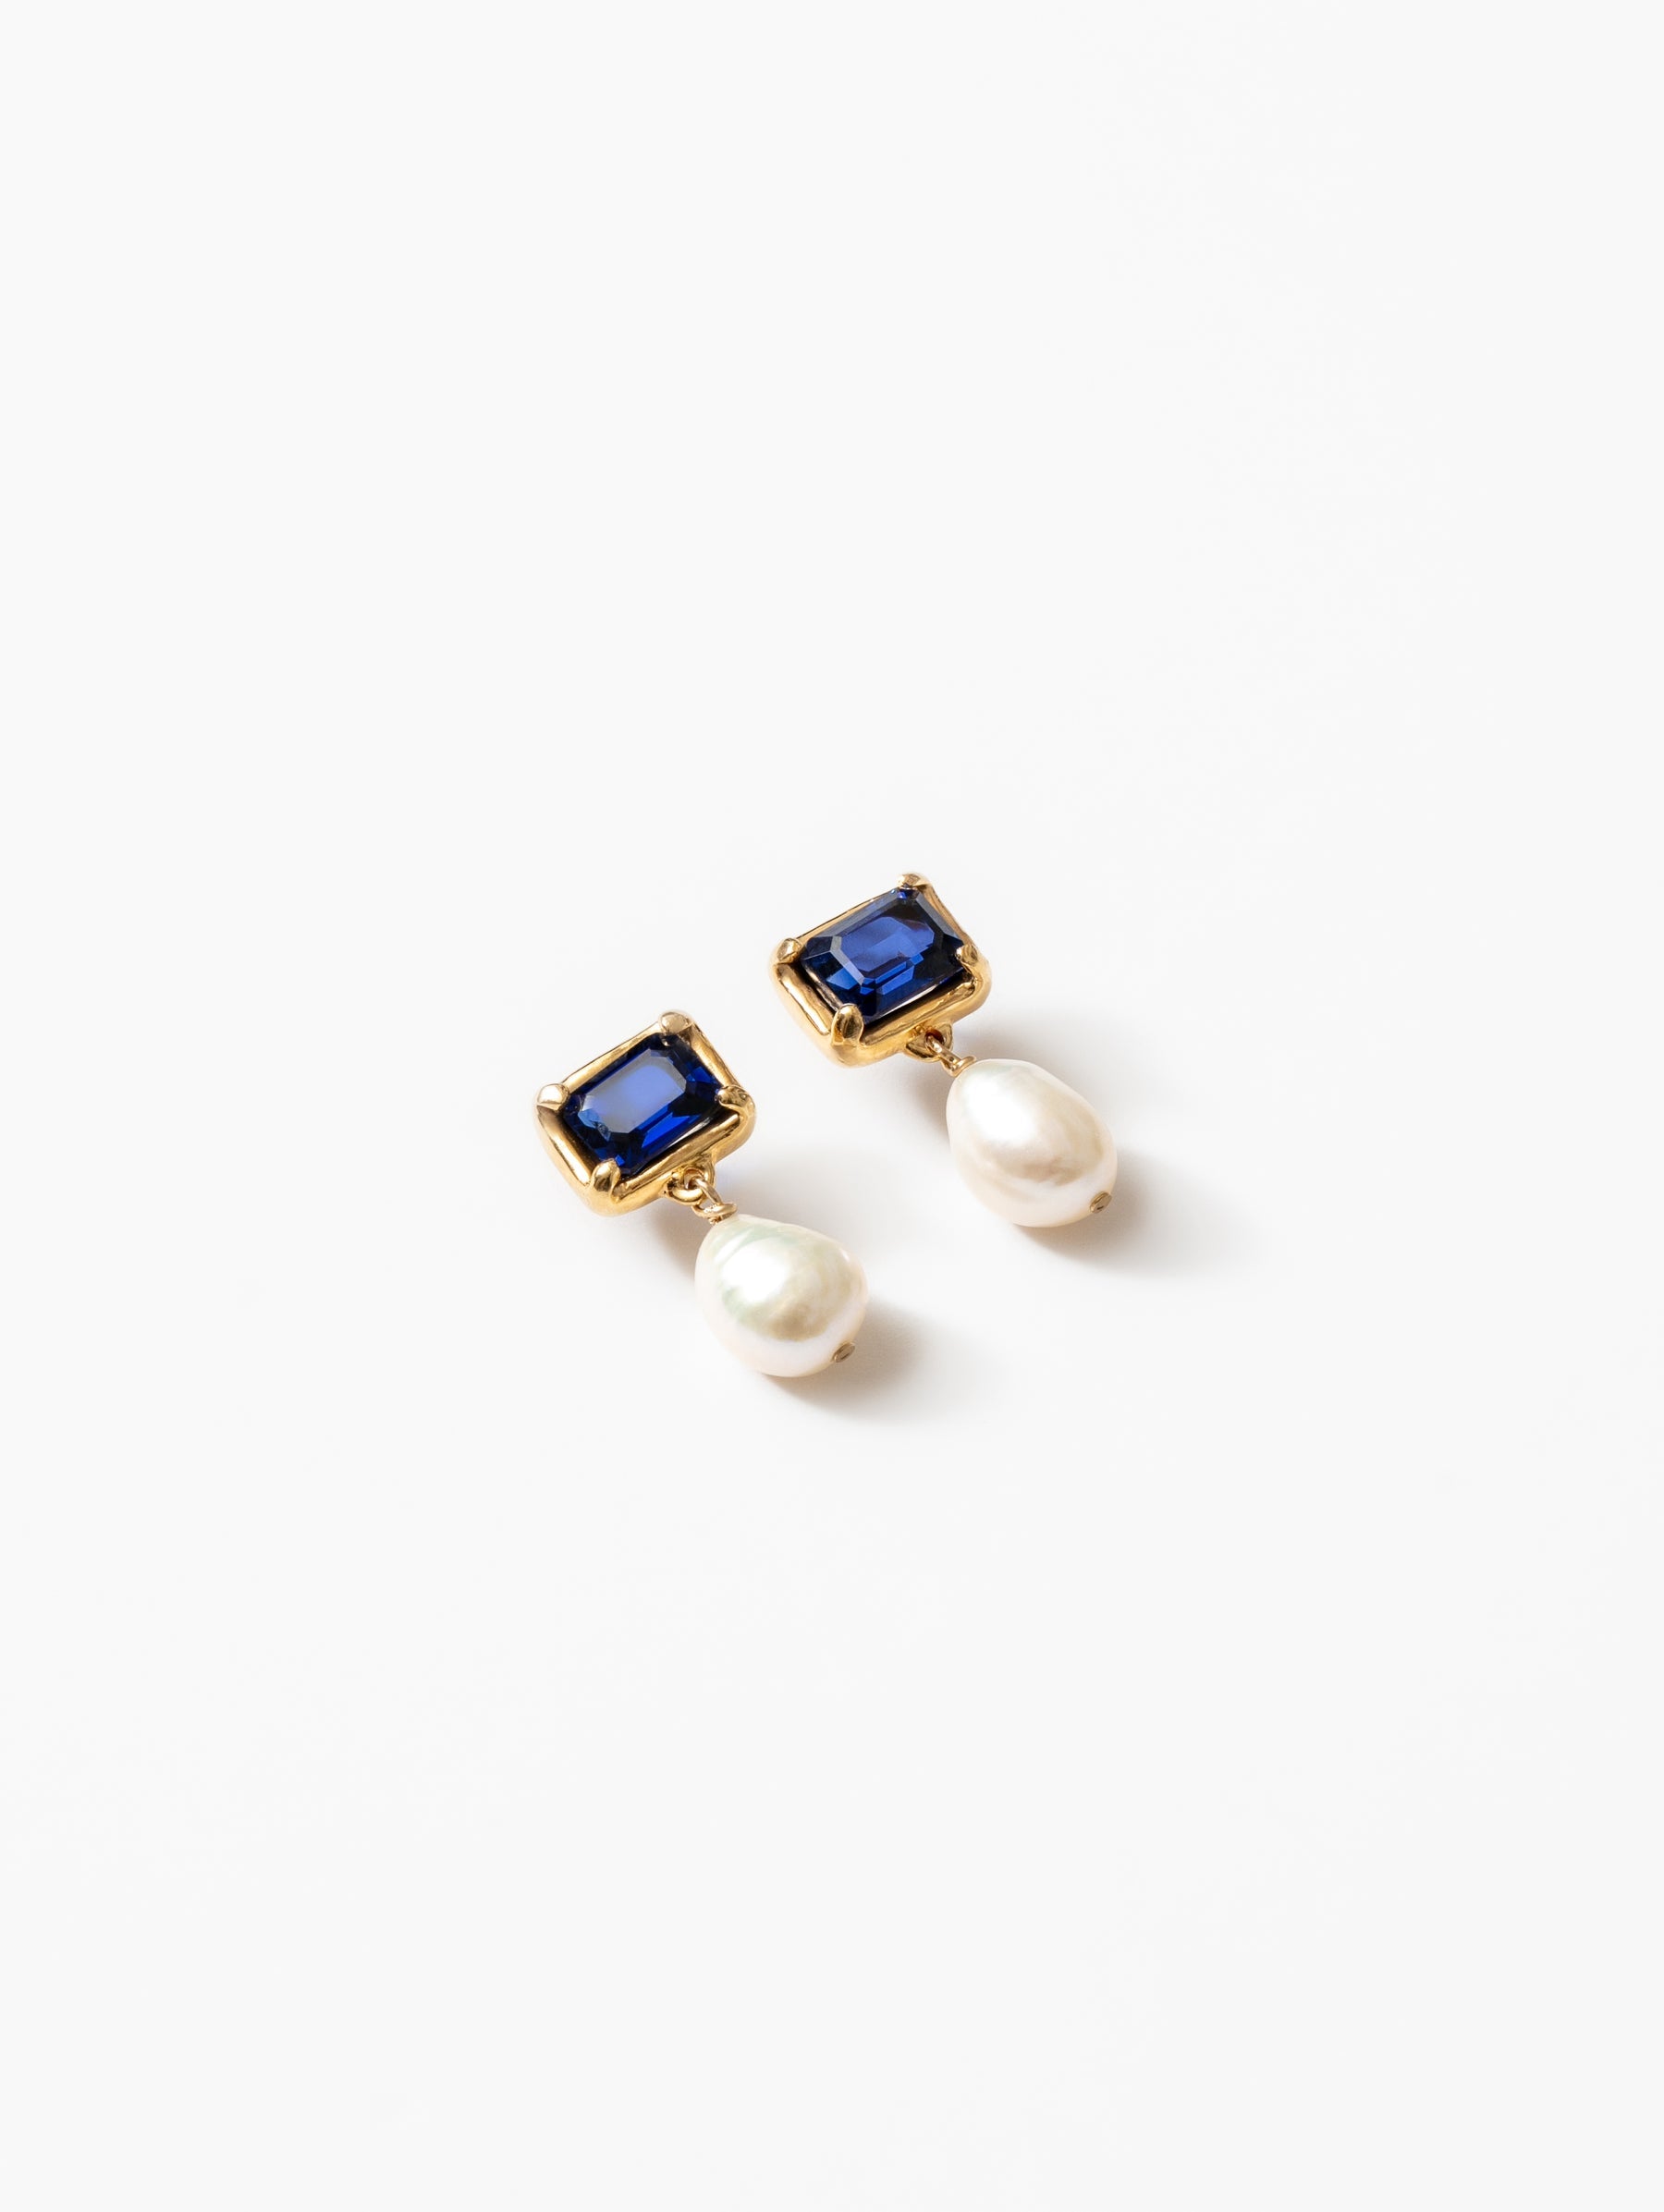 Sophie Earrings Blue and Gold